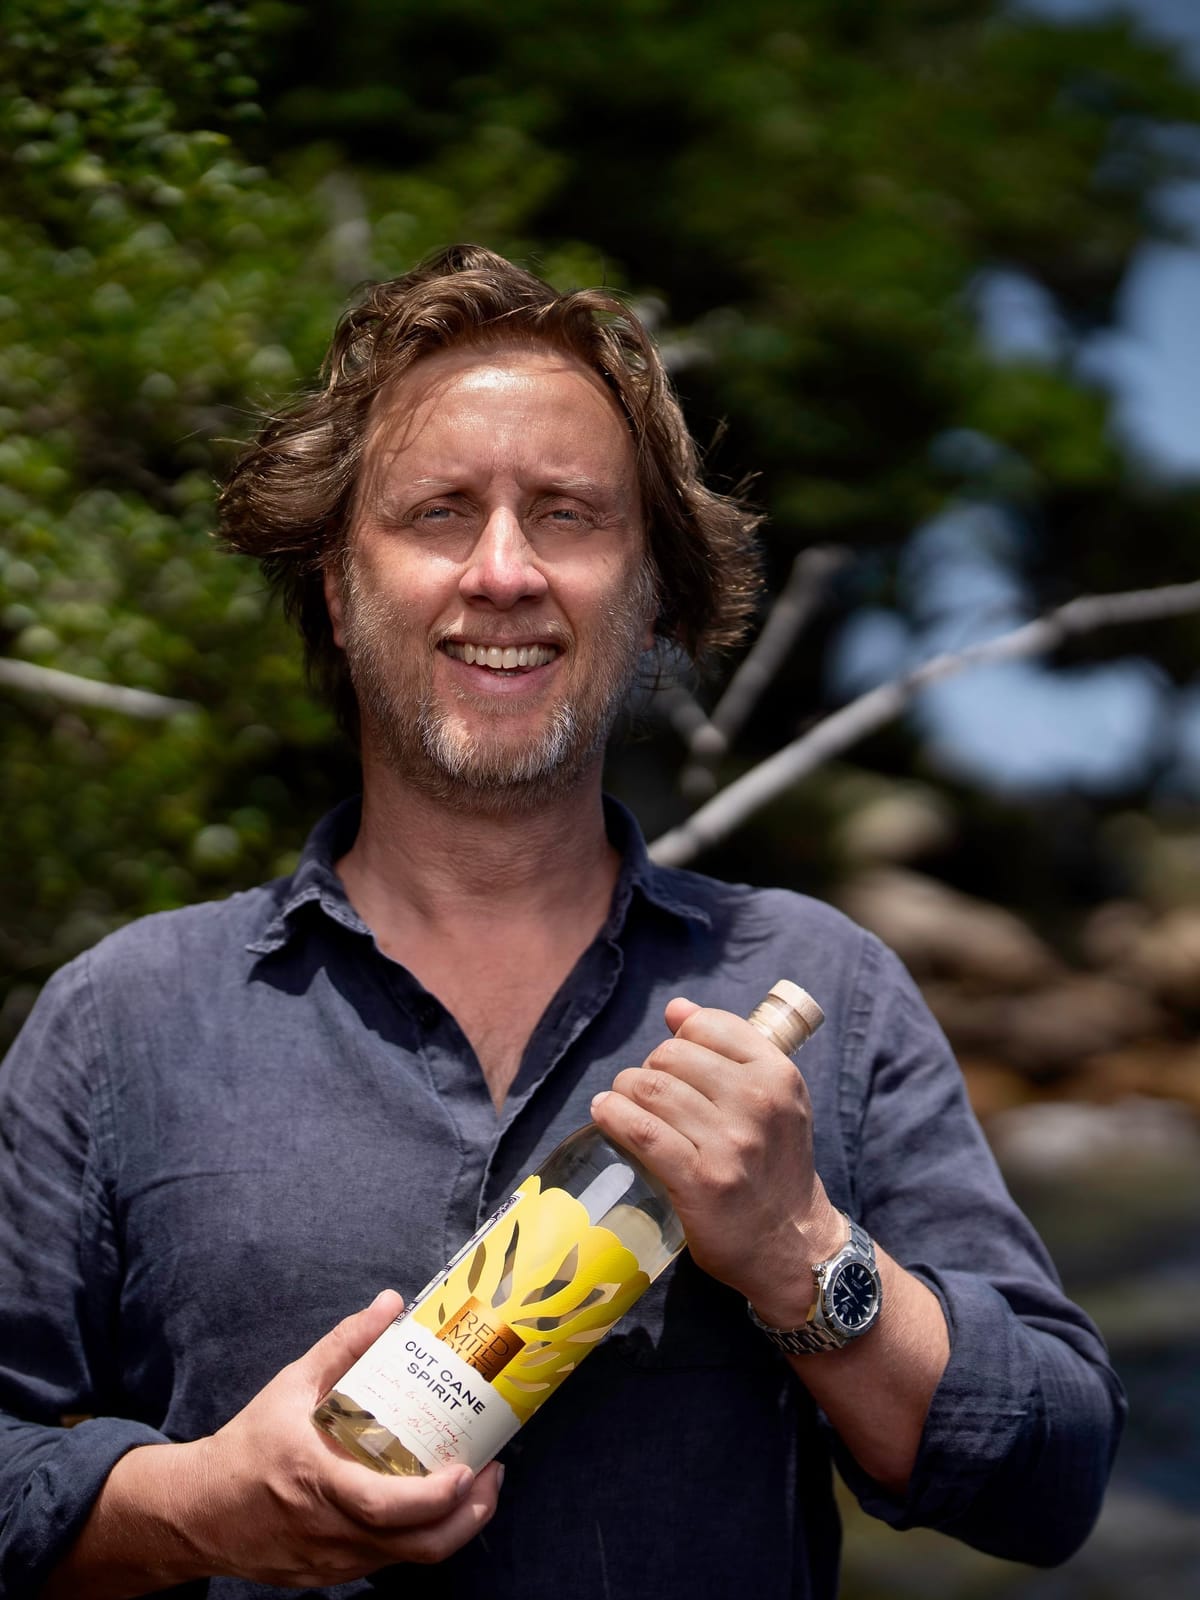 Garth Foster’s new role? Resurrecting a long closed Sydney rum brand and distillery